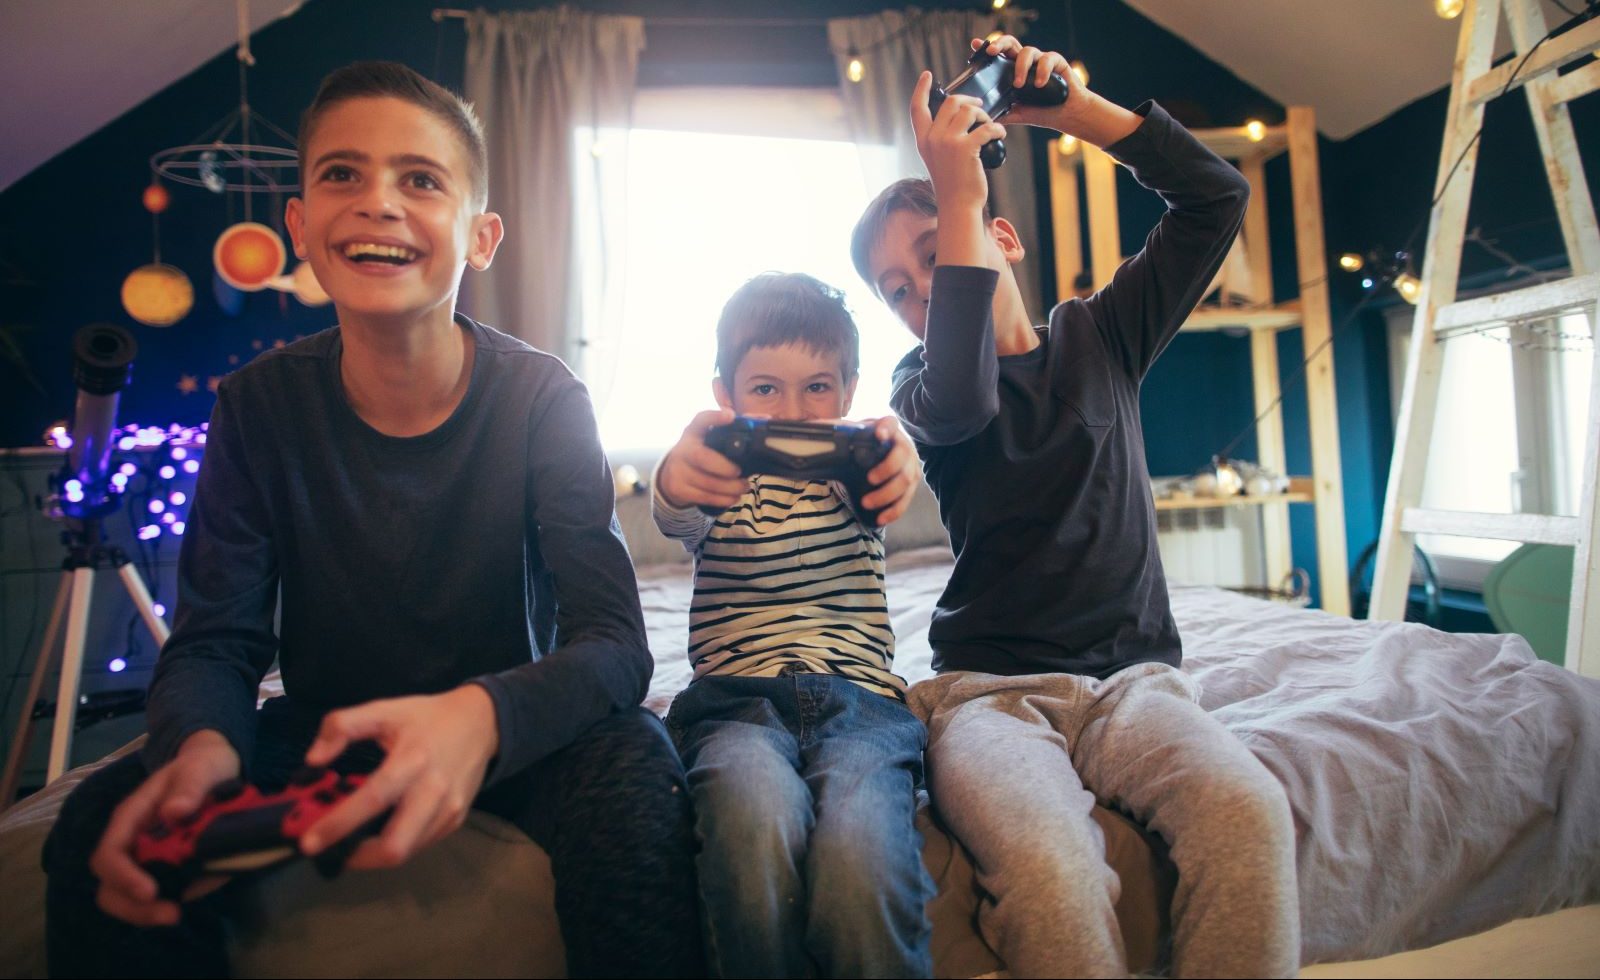 Smart Ways to Make Playing Video Games Healthier